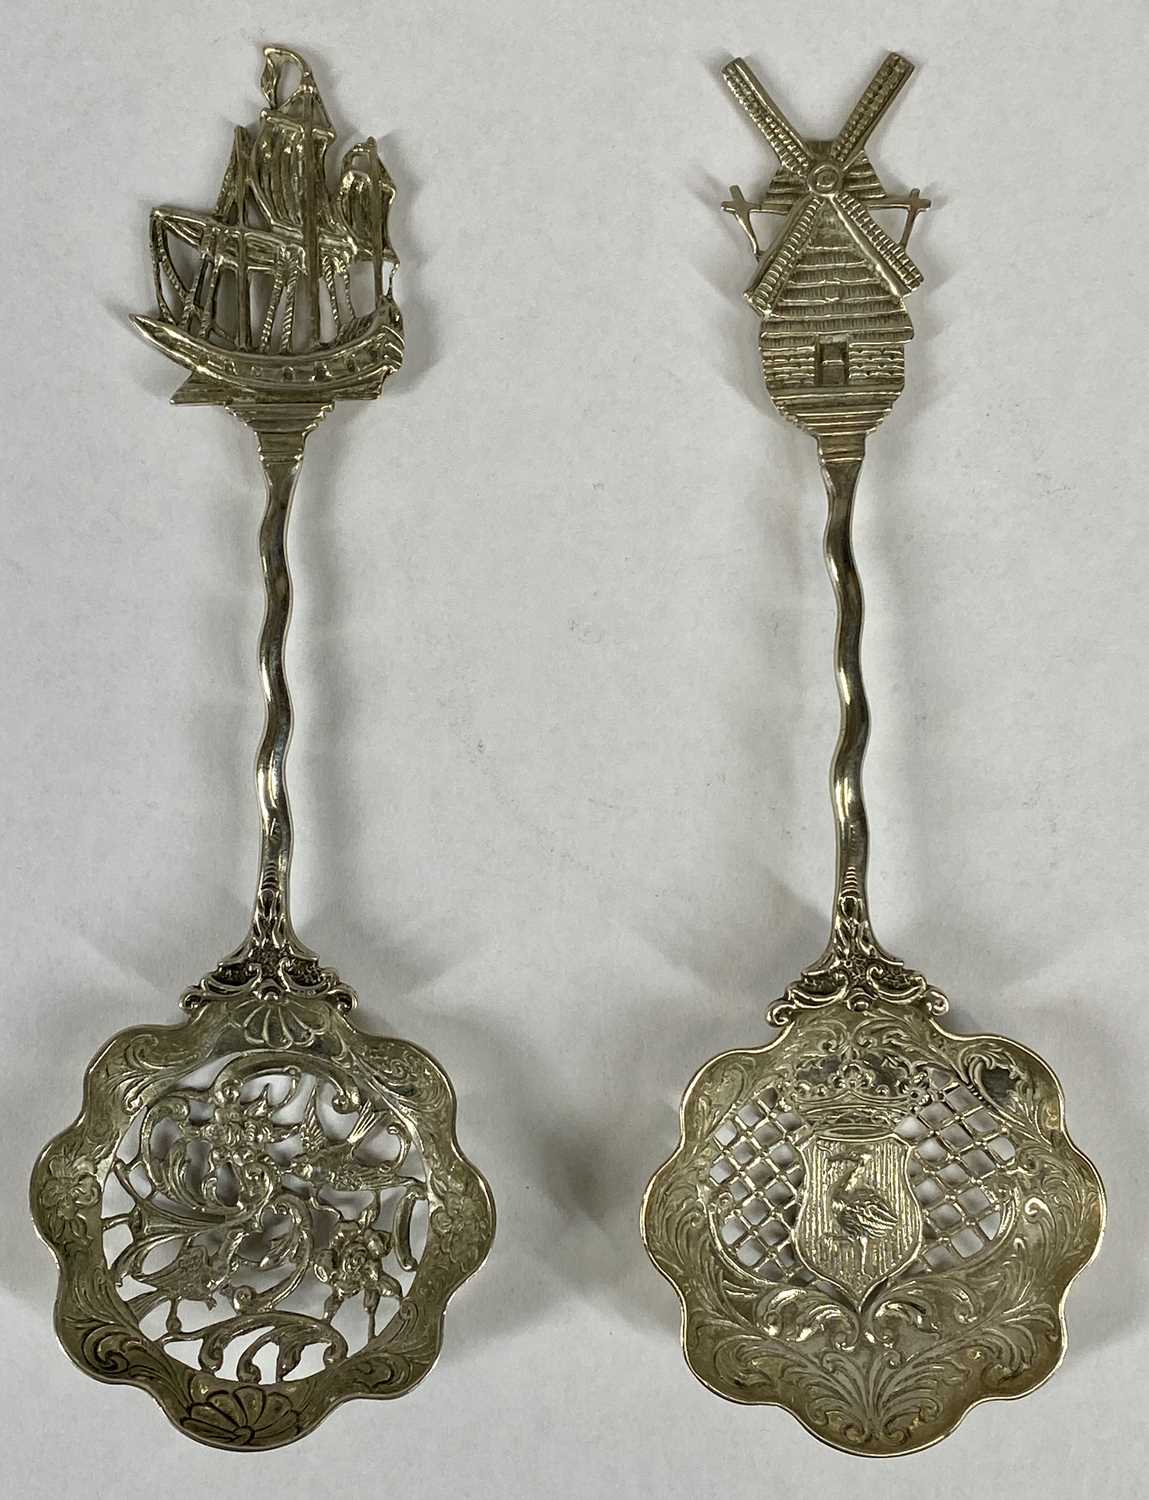 DUTCH WHITE METAL CUTLERY, mid/late 19th century, spoon with milkmaid handle, spoon and cake slice - Image 6 of 6